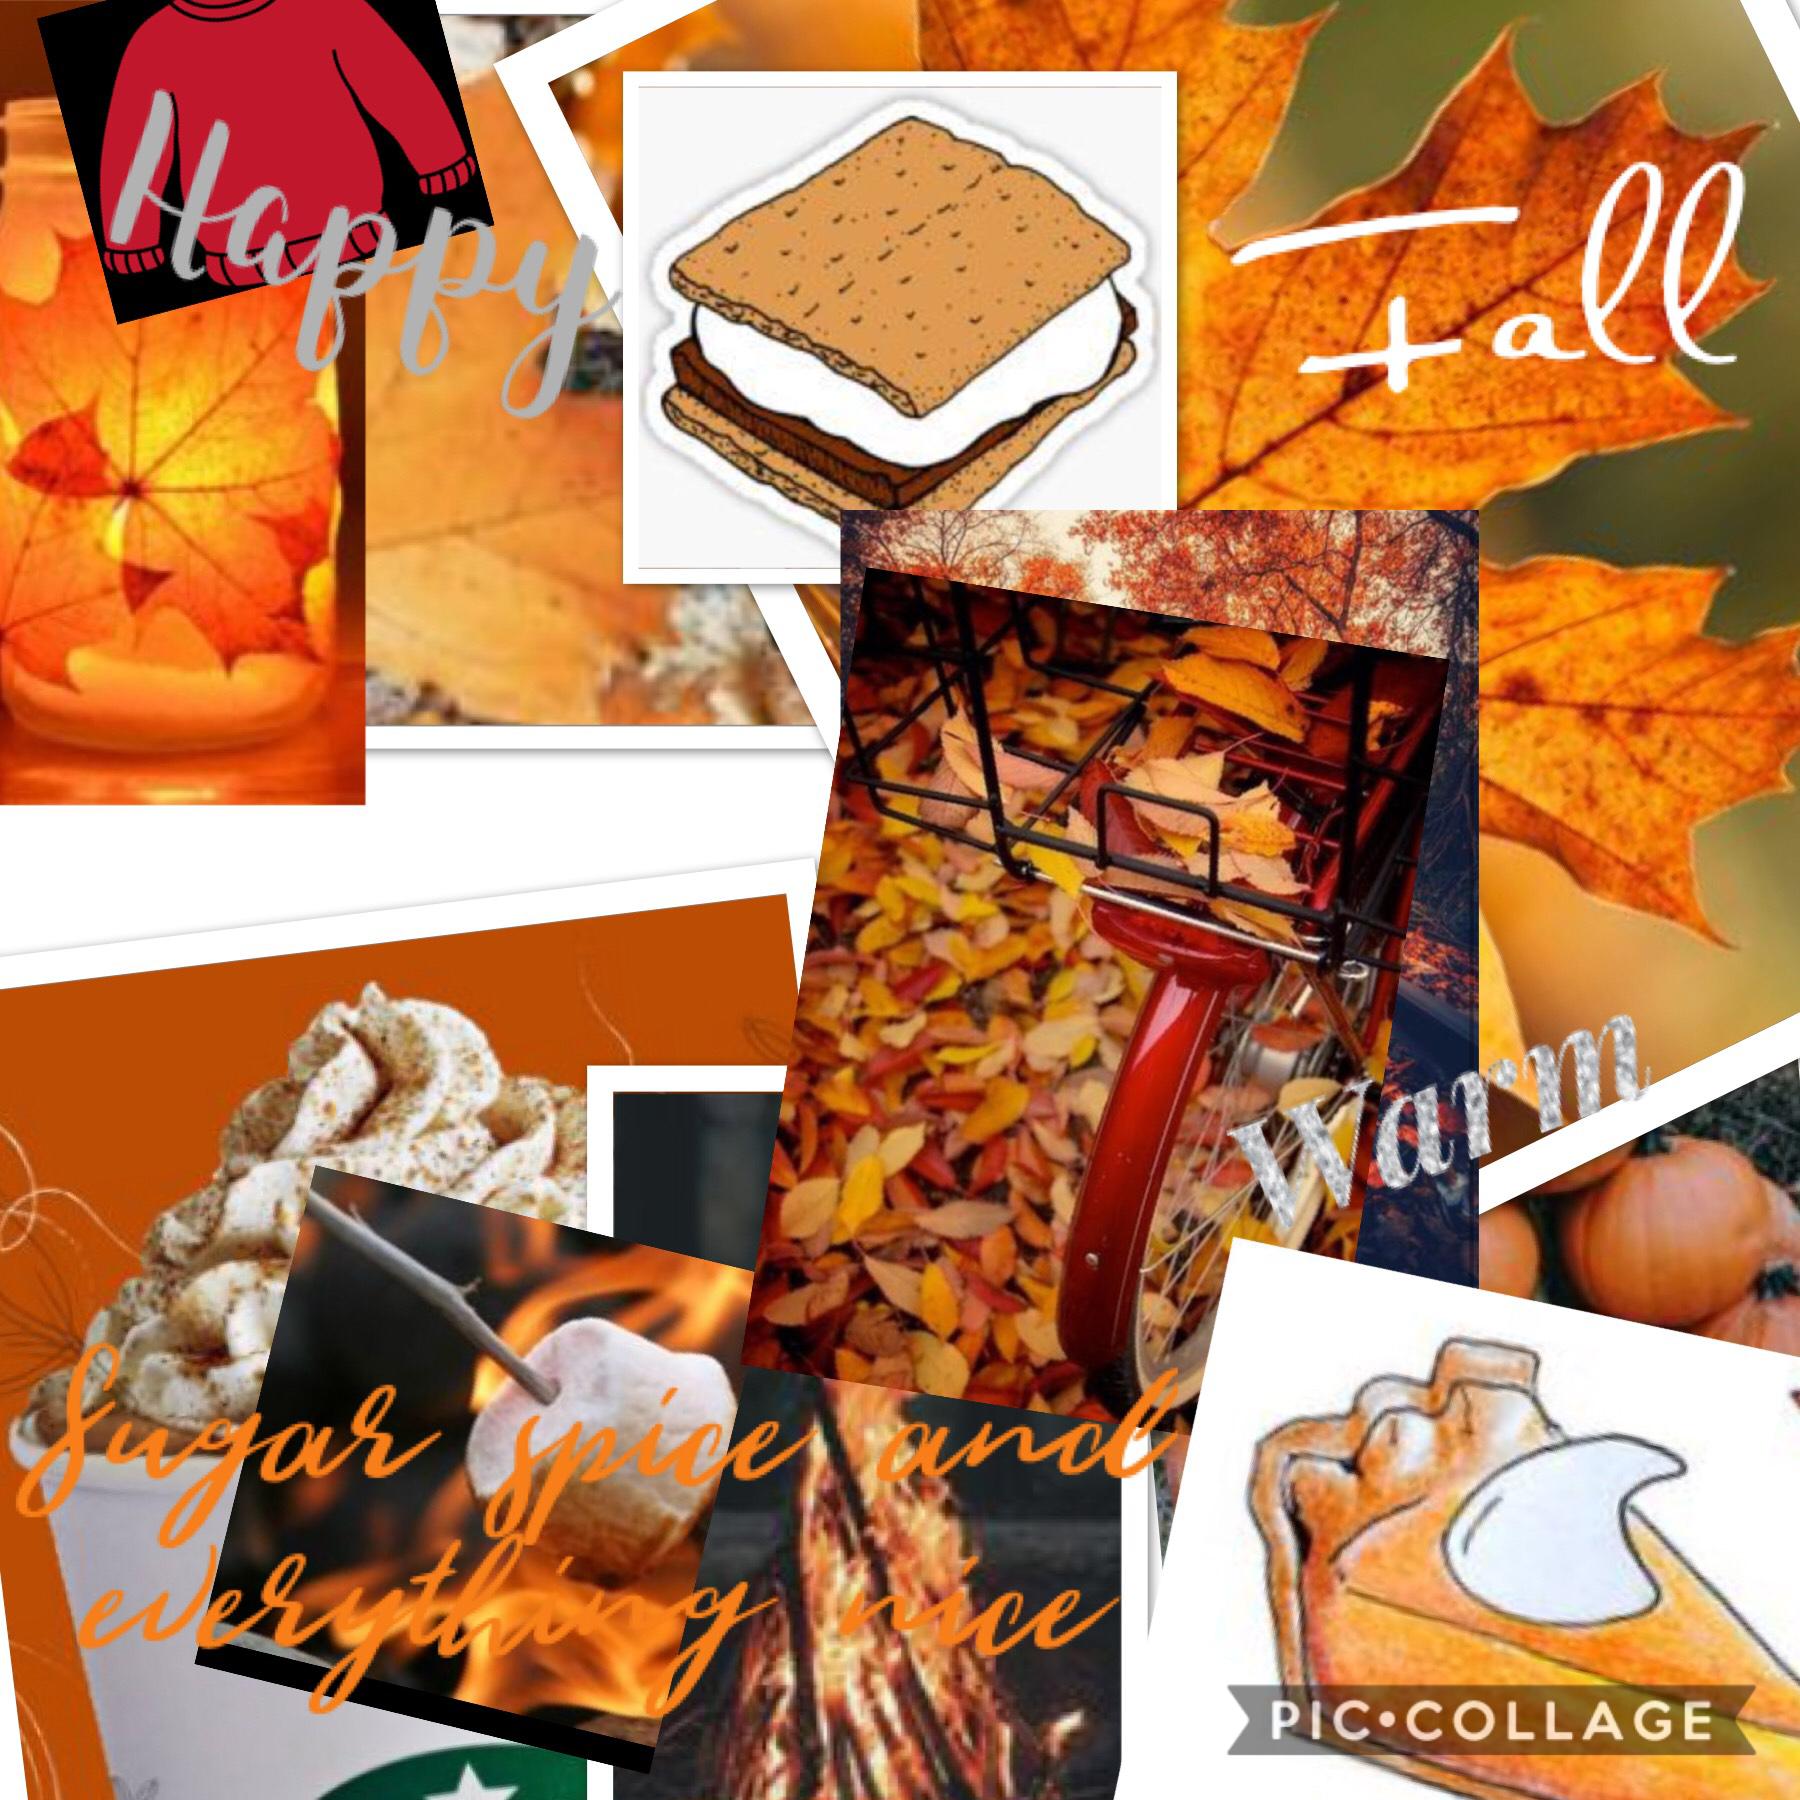        TAP!! 

Fall is finally here! 
Remix this collage and do whatever you feel like doing to it! 
I will announce the winner at the end of October! Good luck! 

Ps if you do not like this collage then you can definitely make a new one as long as it is 